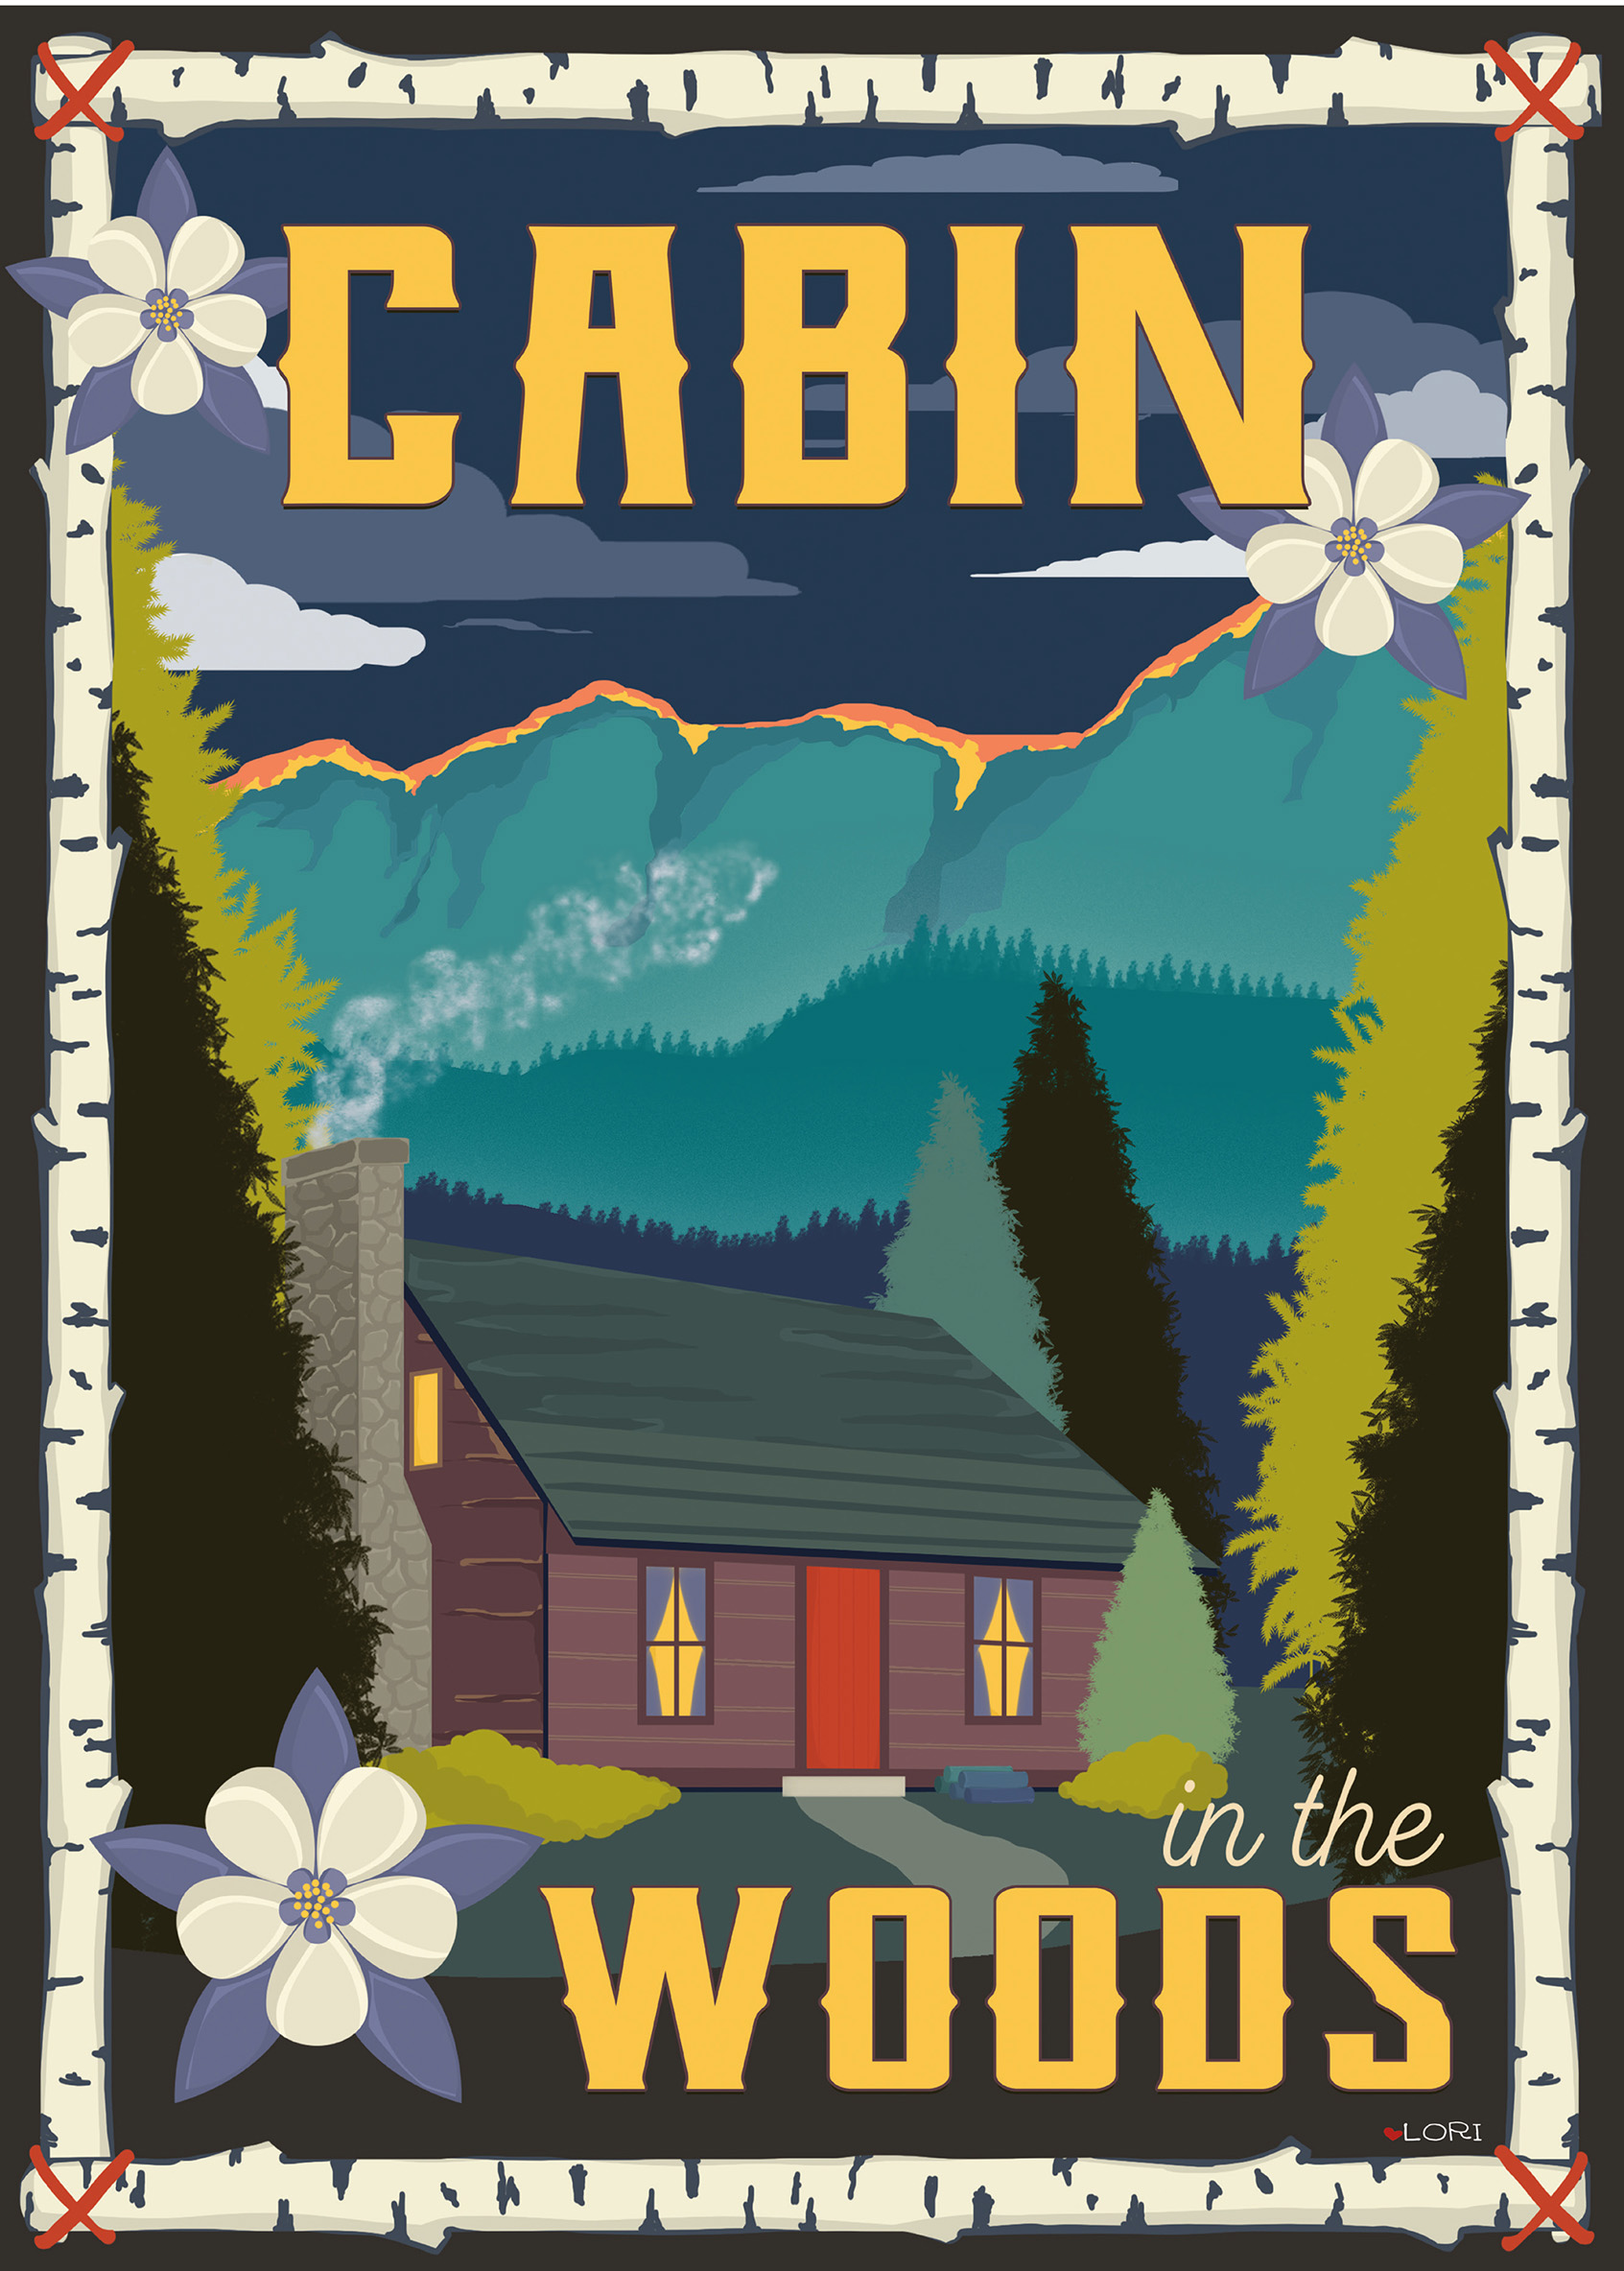 Cabin in the Woods - Let's Explore